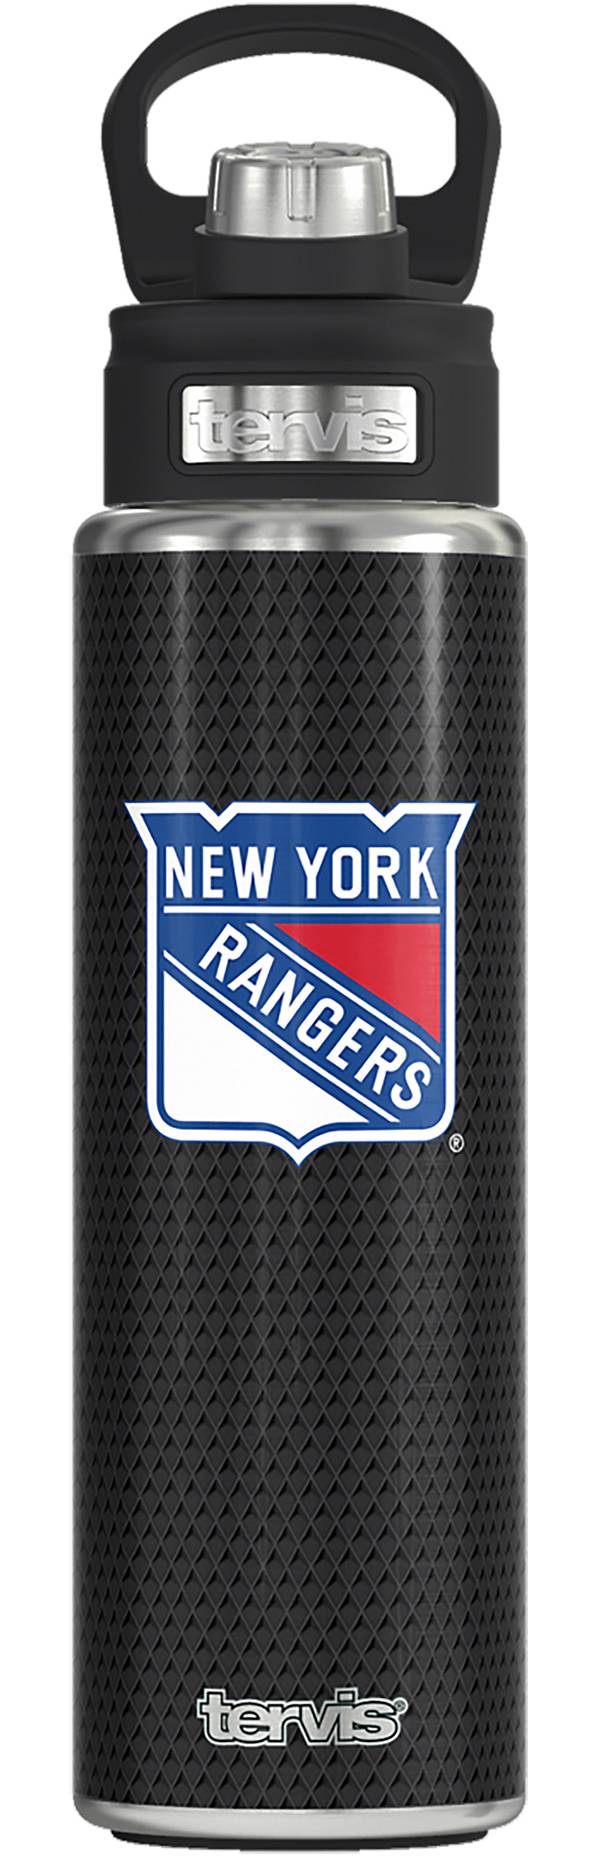 Tervis New York Rangers Puck 24oz. Stainless Steel Tumbler product image